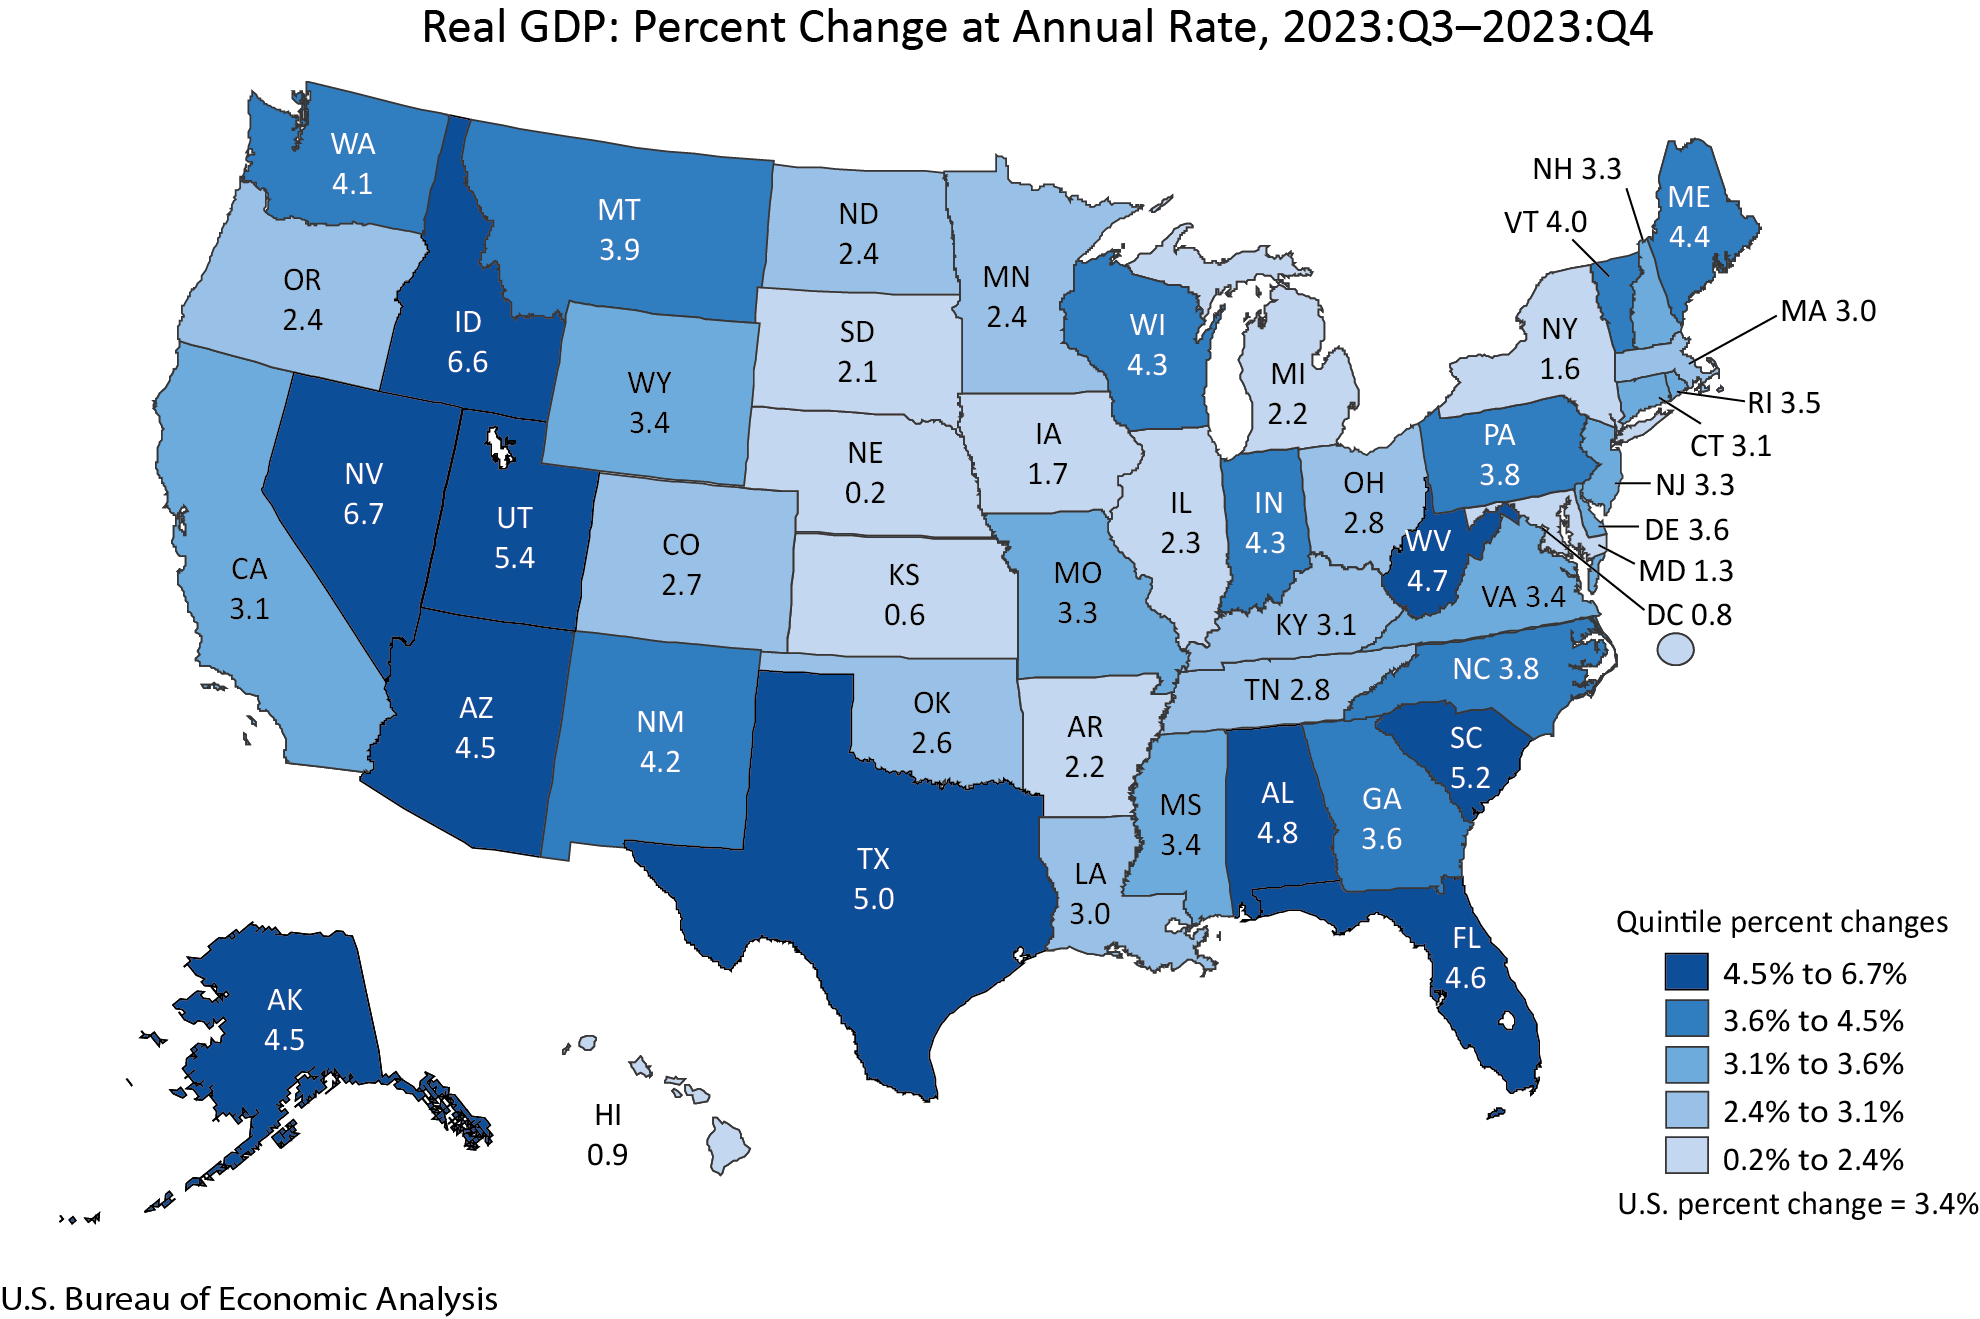 Real GDP: Percent Change at Annual Rate, 2023:Q3-2023:Q4